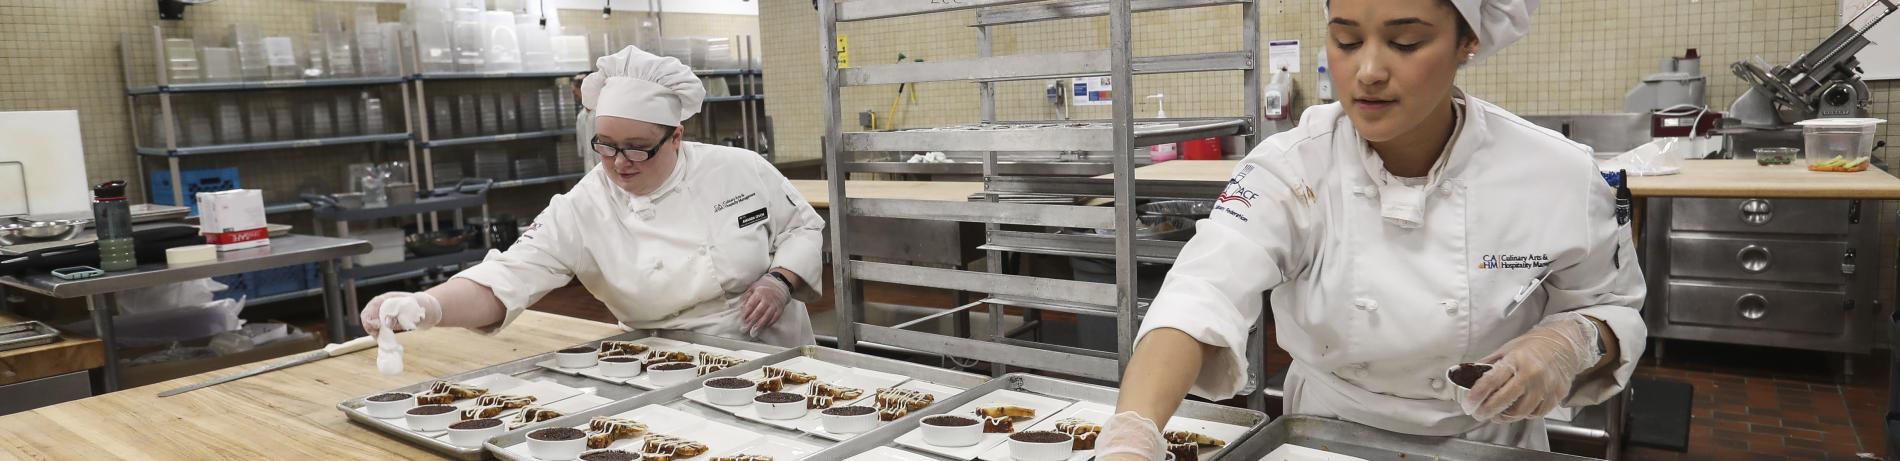 two culinary students arrange desserts in a kitchen